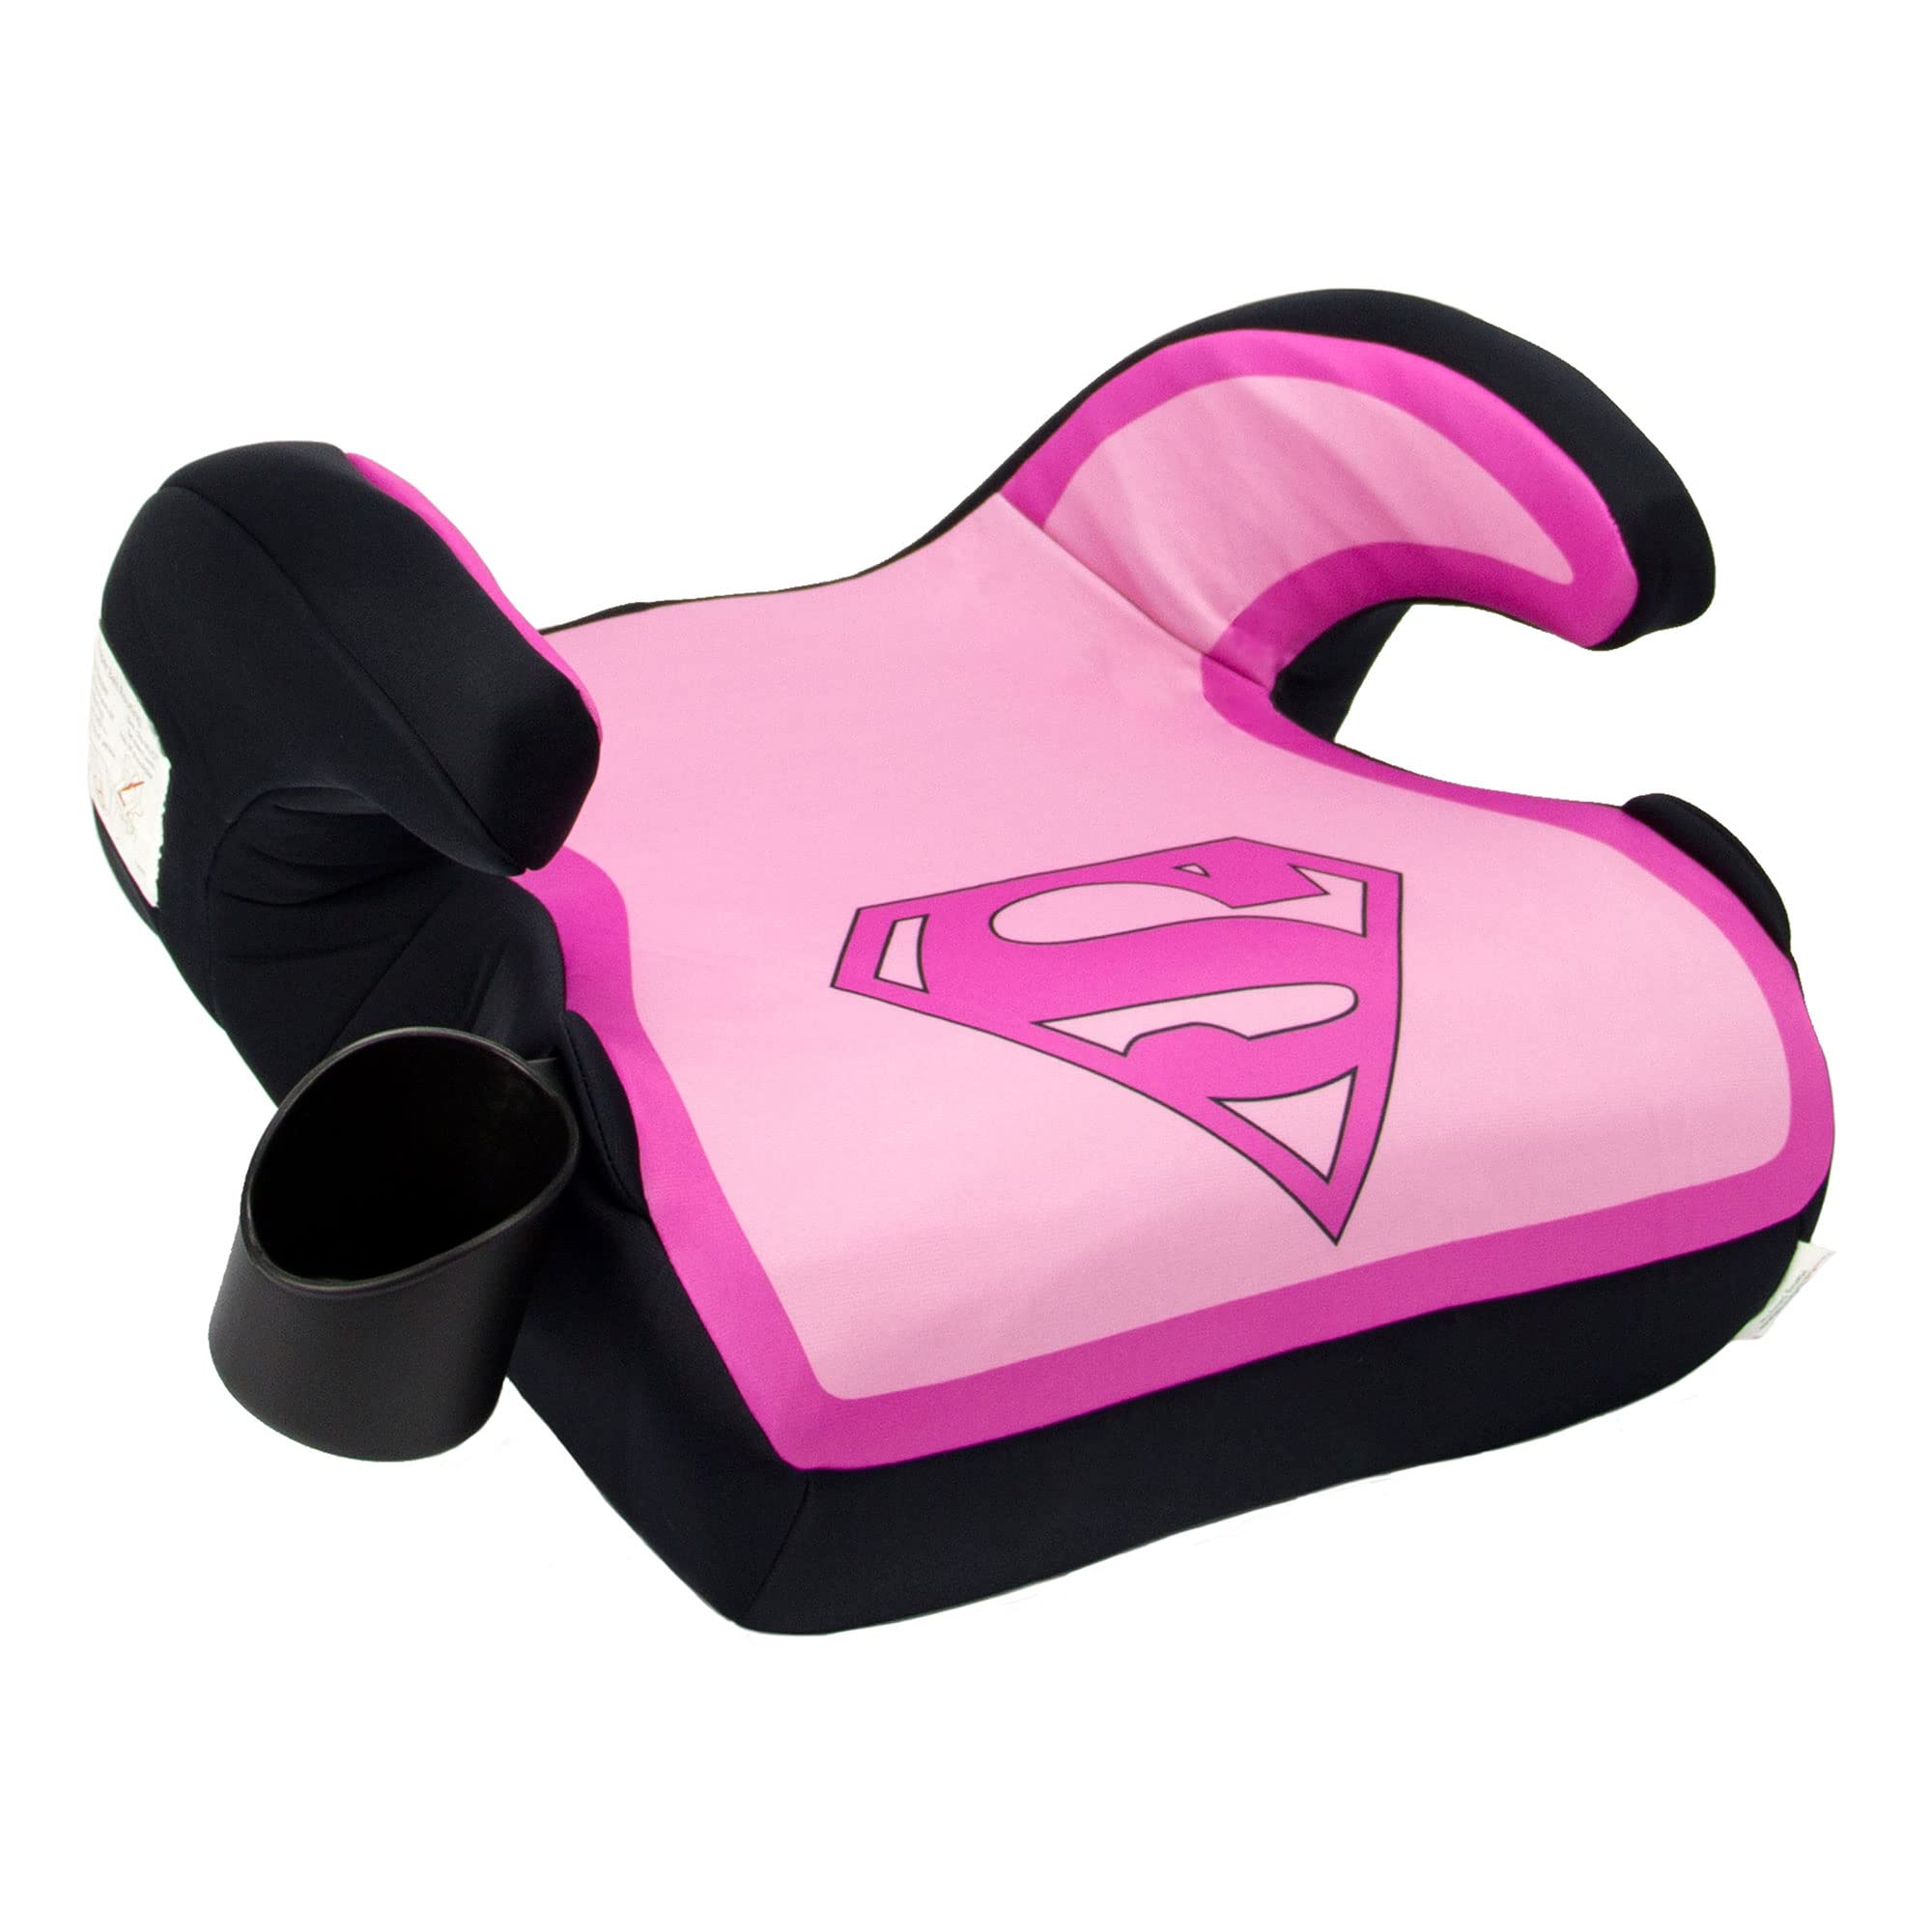 KidsEmbrace DC Comics Pink Supergirl Backless Booster Car Seat with Seatbelt Positioning Clip